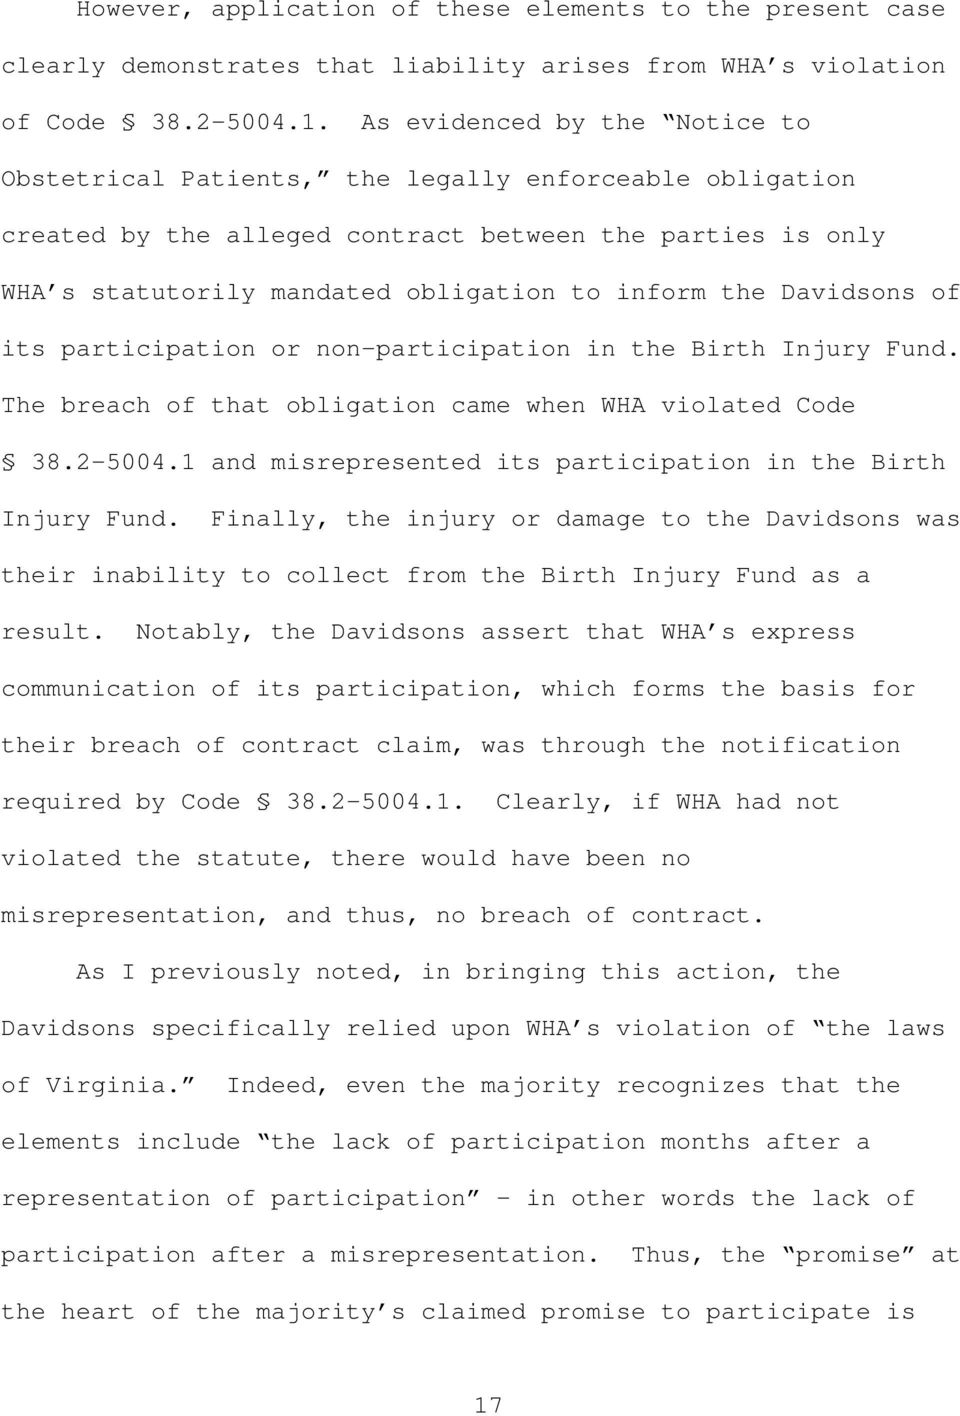 Davidsons of its participation or non-participation in the Birth Injury Fund. The breach of that obligation came when WHA violated Code 38.2-5004.